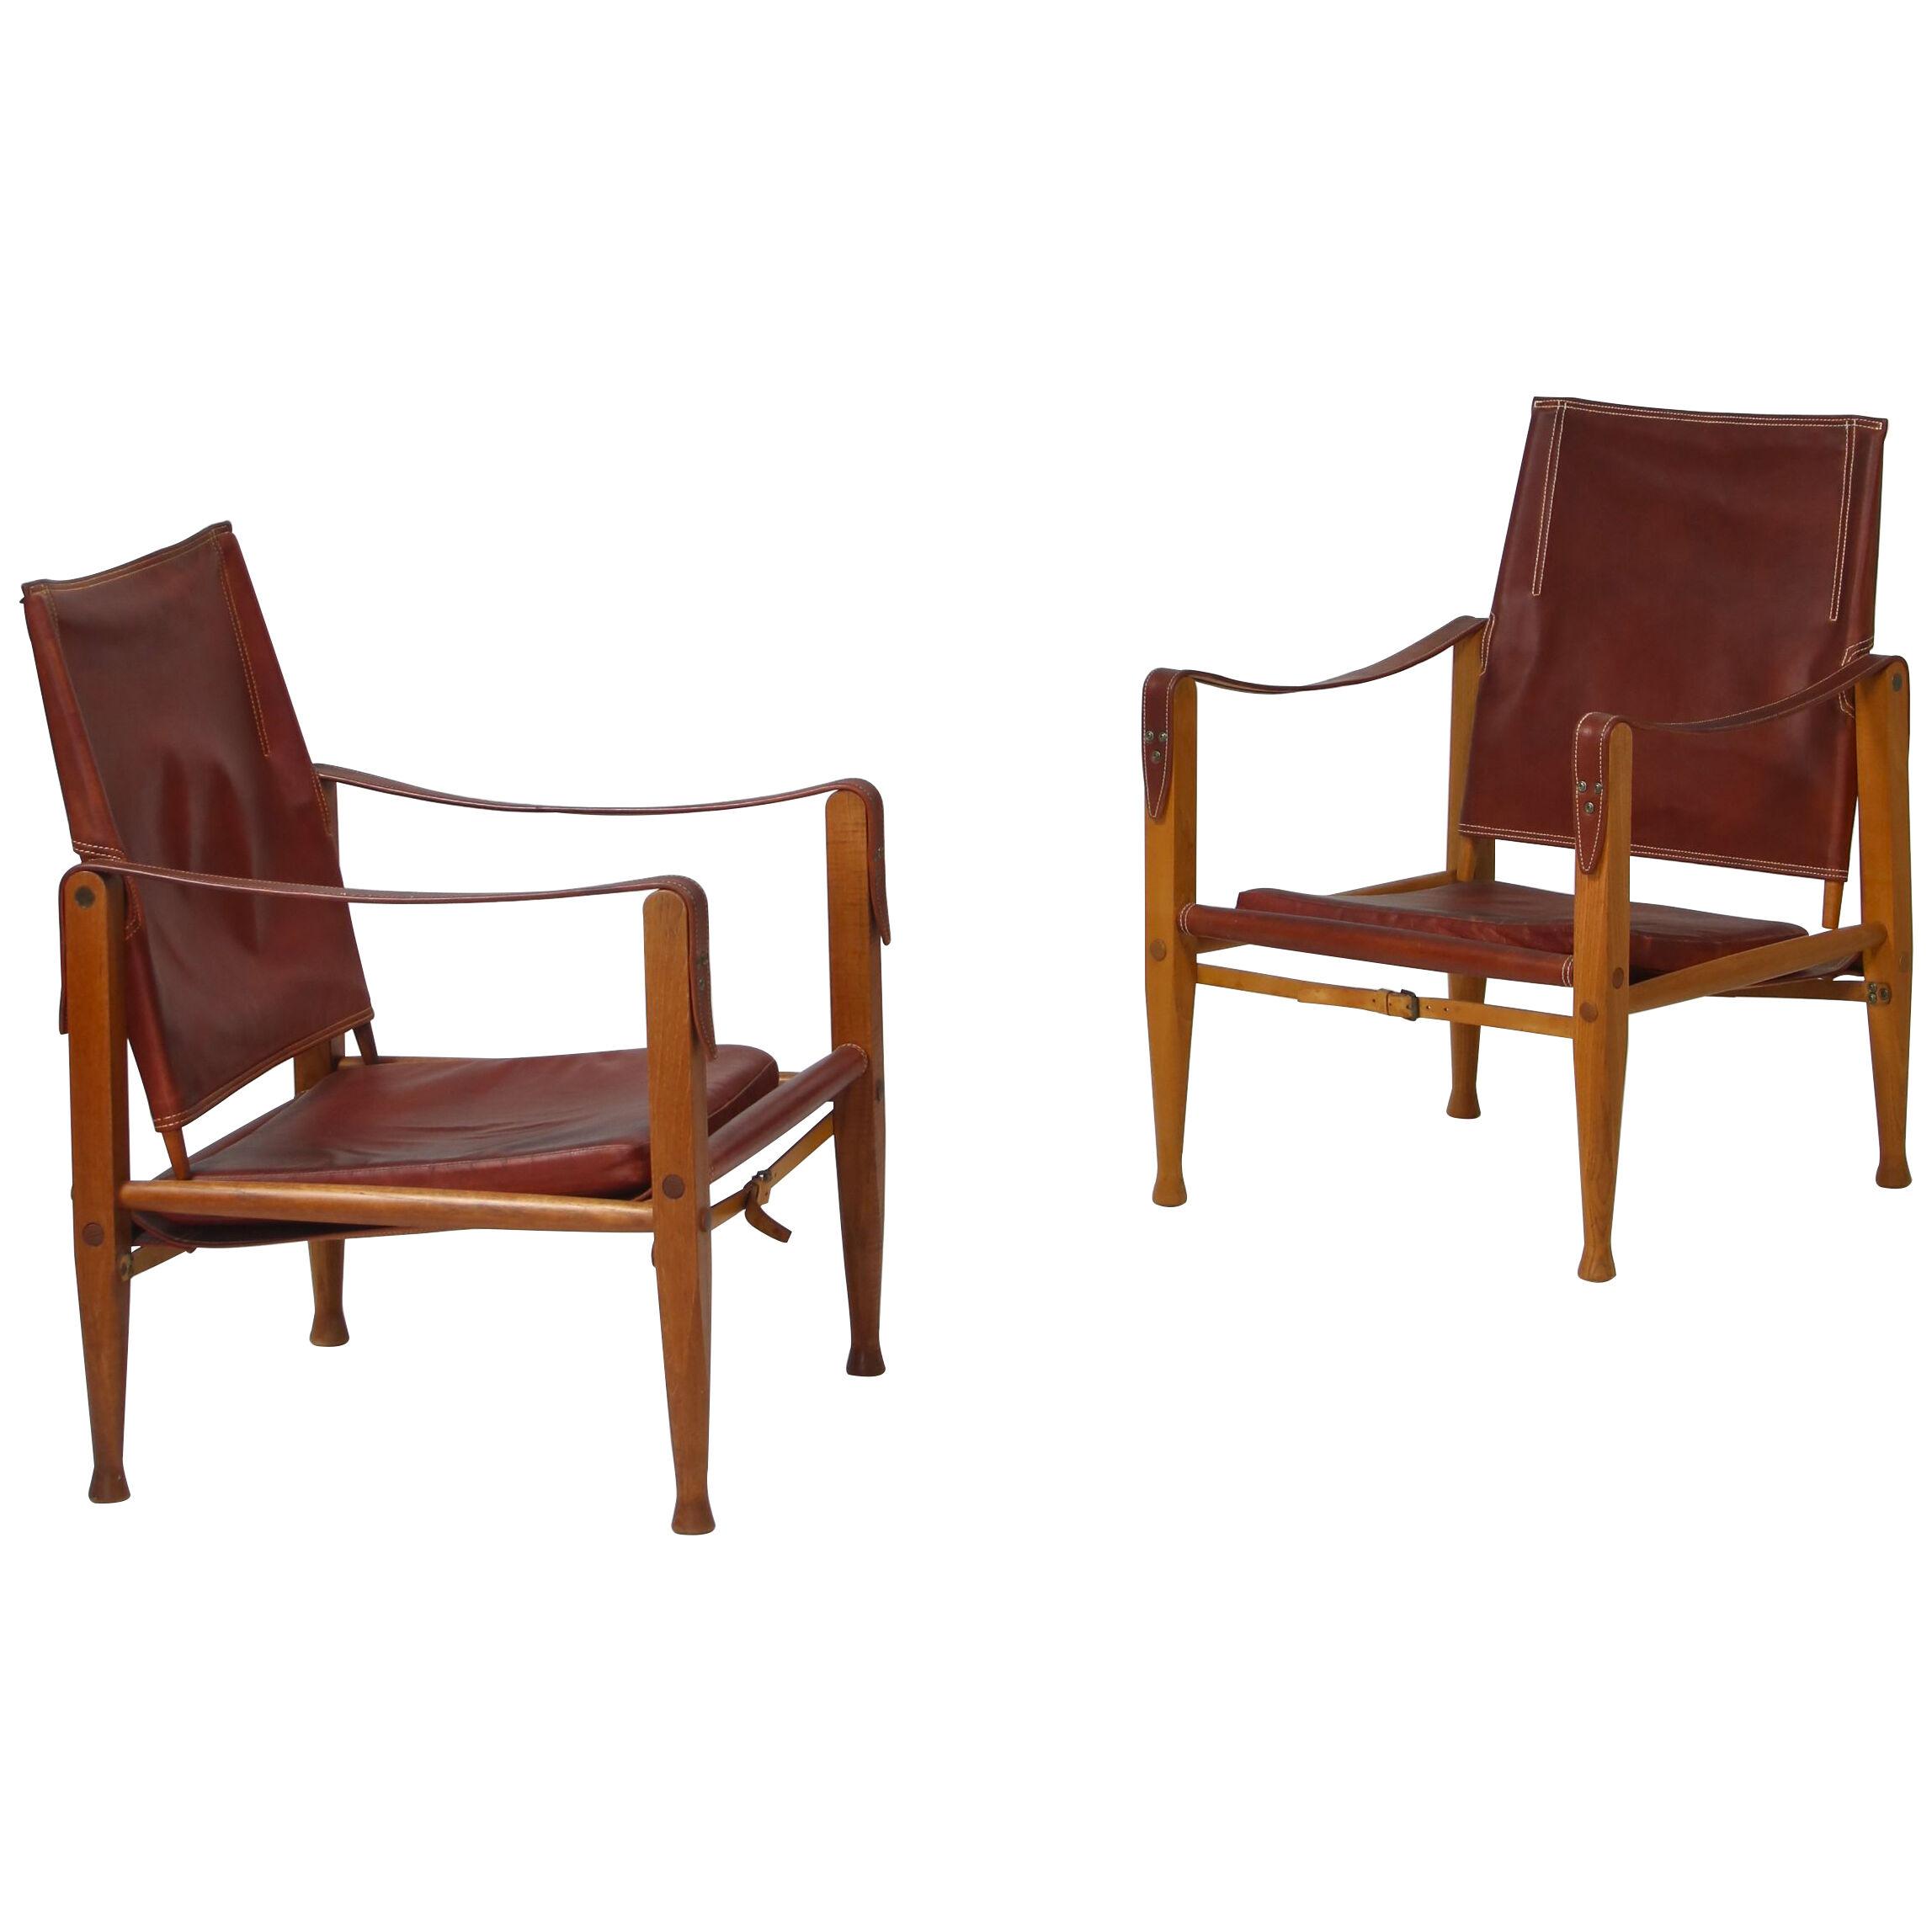 Kaare Klint "Safari" Lounge Chairs in Red Leather and Ash, Rud Rasmussen, 1950s